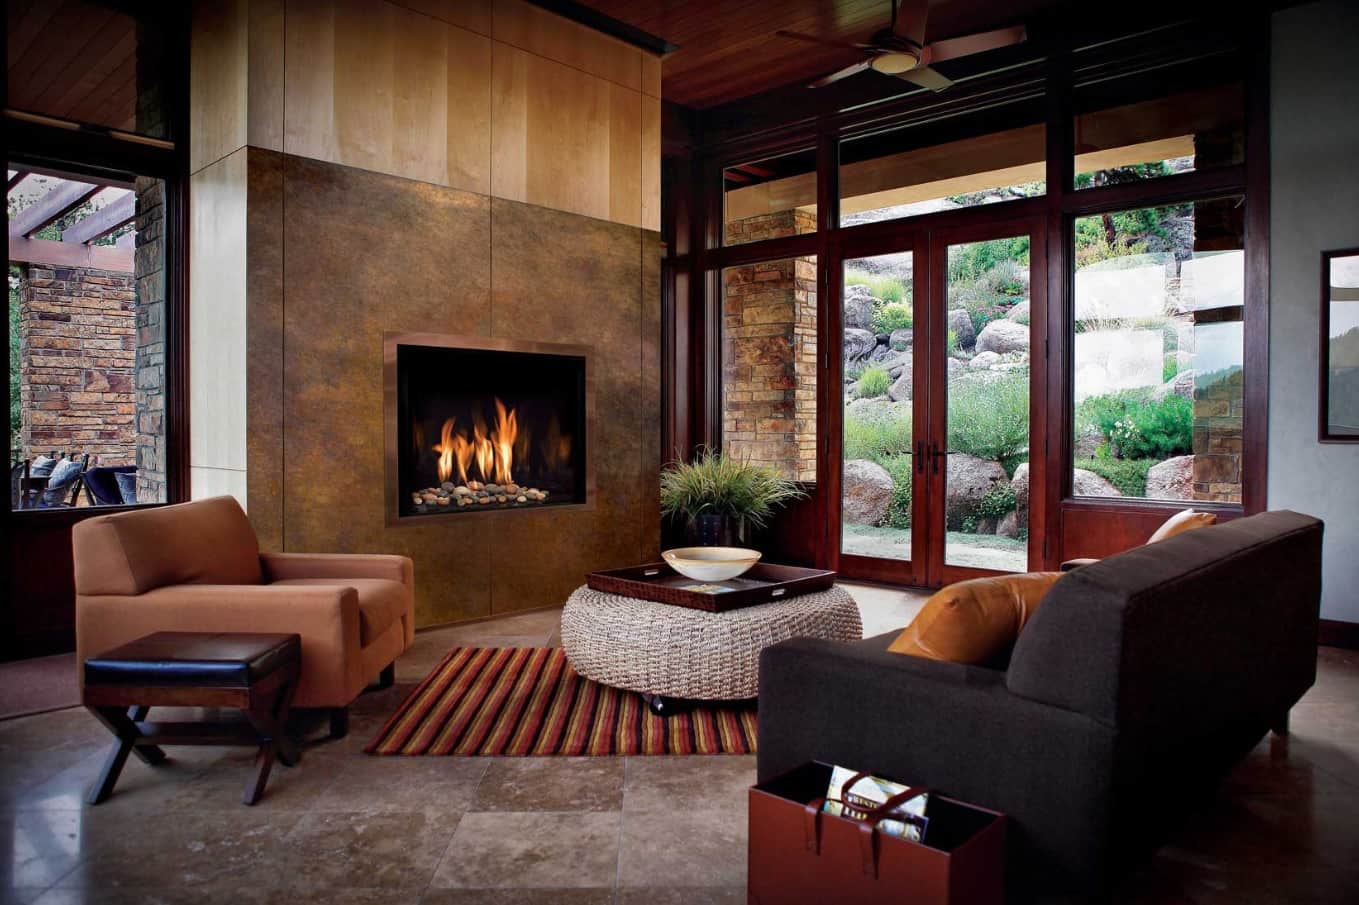 6 Ways You Can Use Cleaner Energy Without Putting Panels on the Roof. Modern natural oriented chic interior design of the house with African touch and electric fireplace